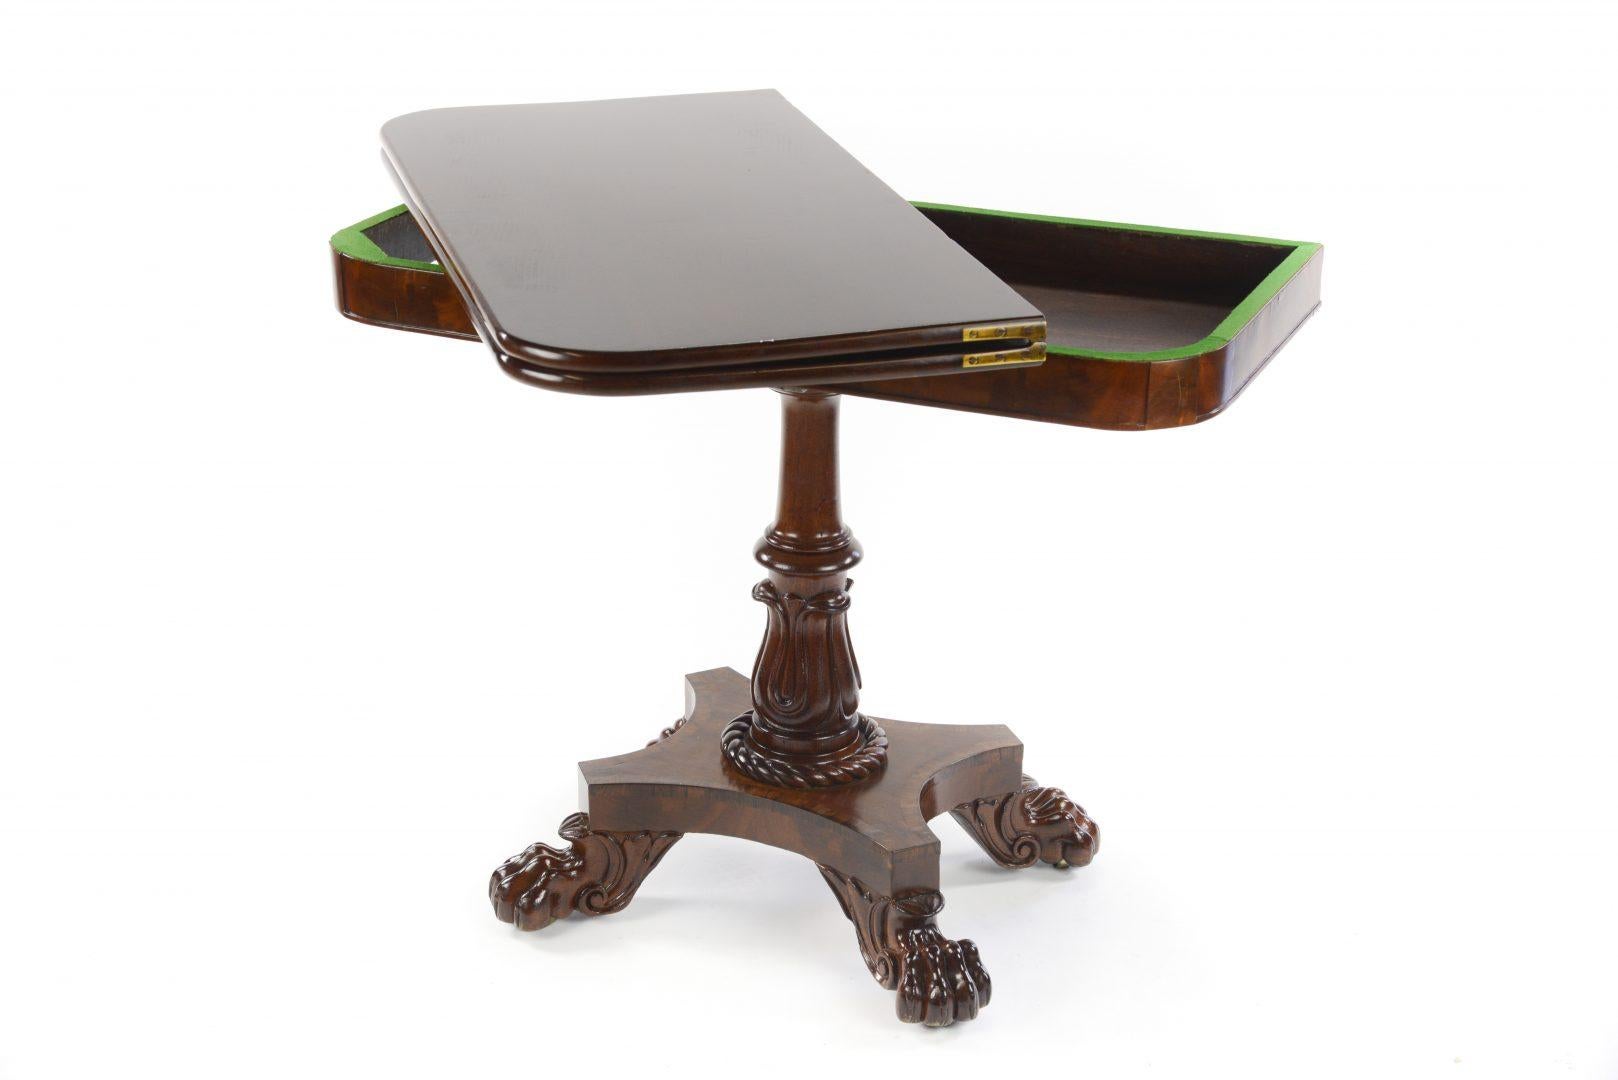 A very good William IV mahogany fold over tea table in the manner of Gillows, with a carved central column sitting on hairy paw feet.

Gillows of Lancaster and London, also known as Gillow & Co., was an English furniture making firm based in